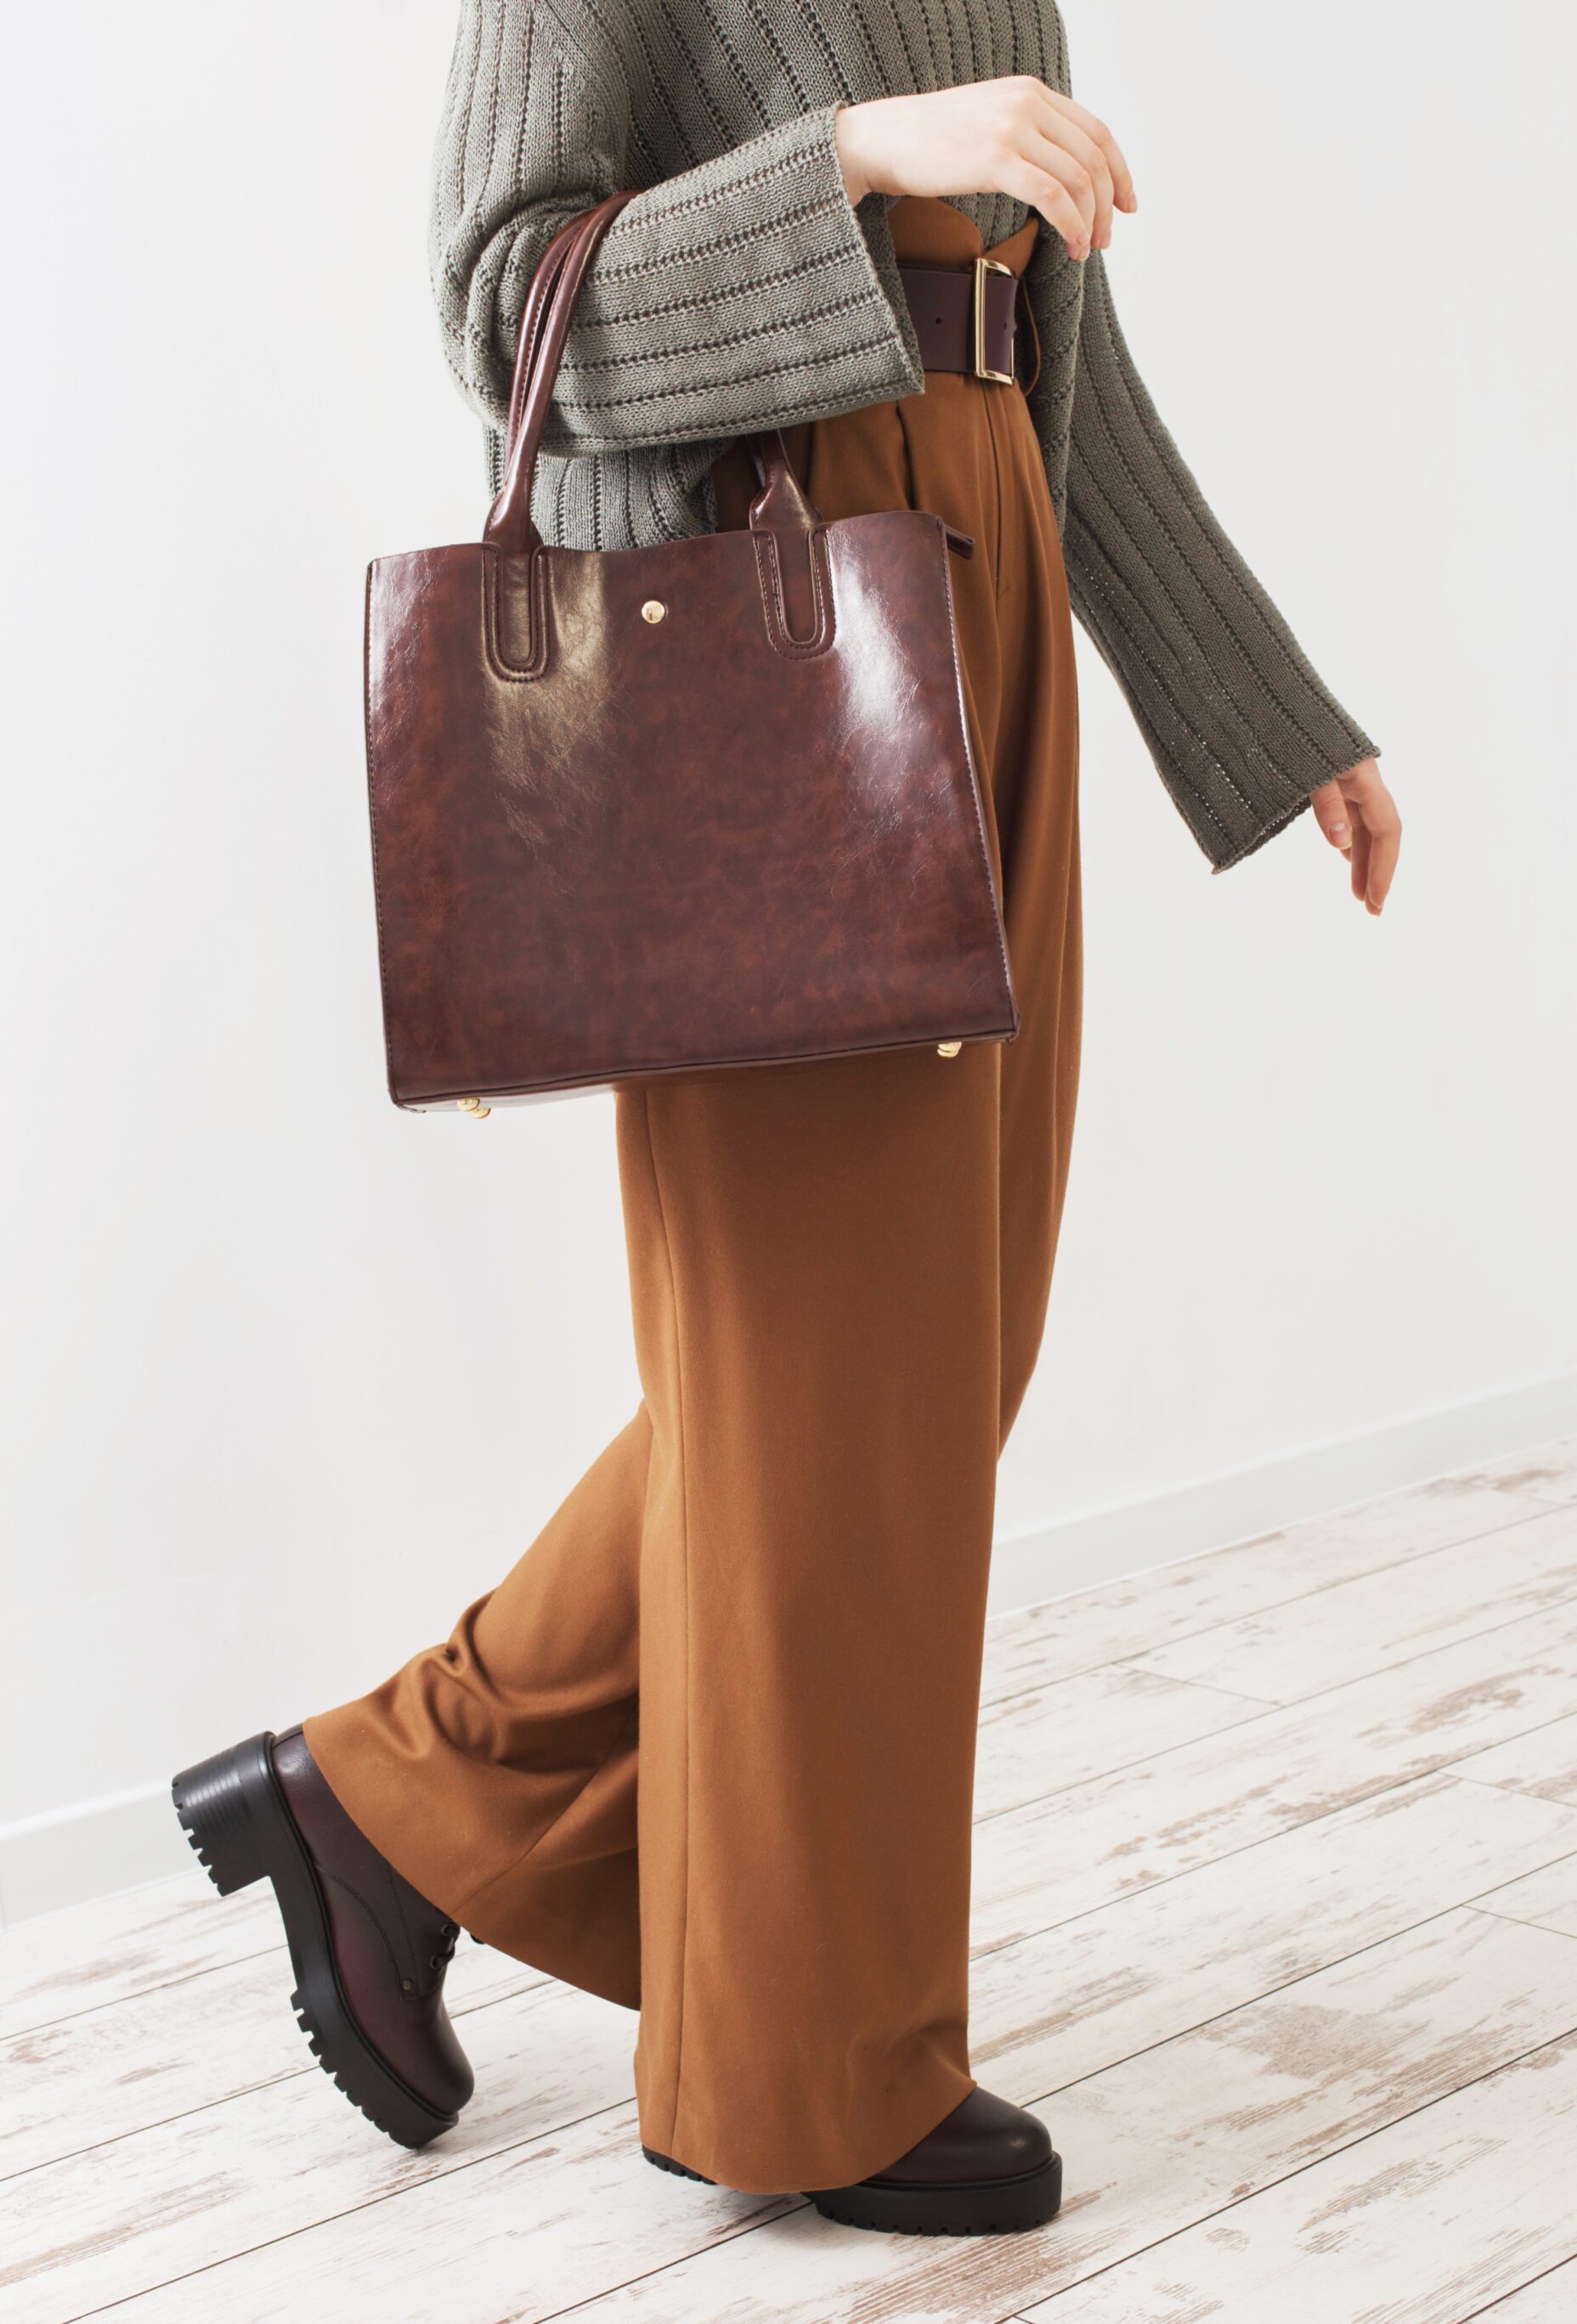 Matching Palazzo Pants With Brown Boots